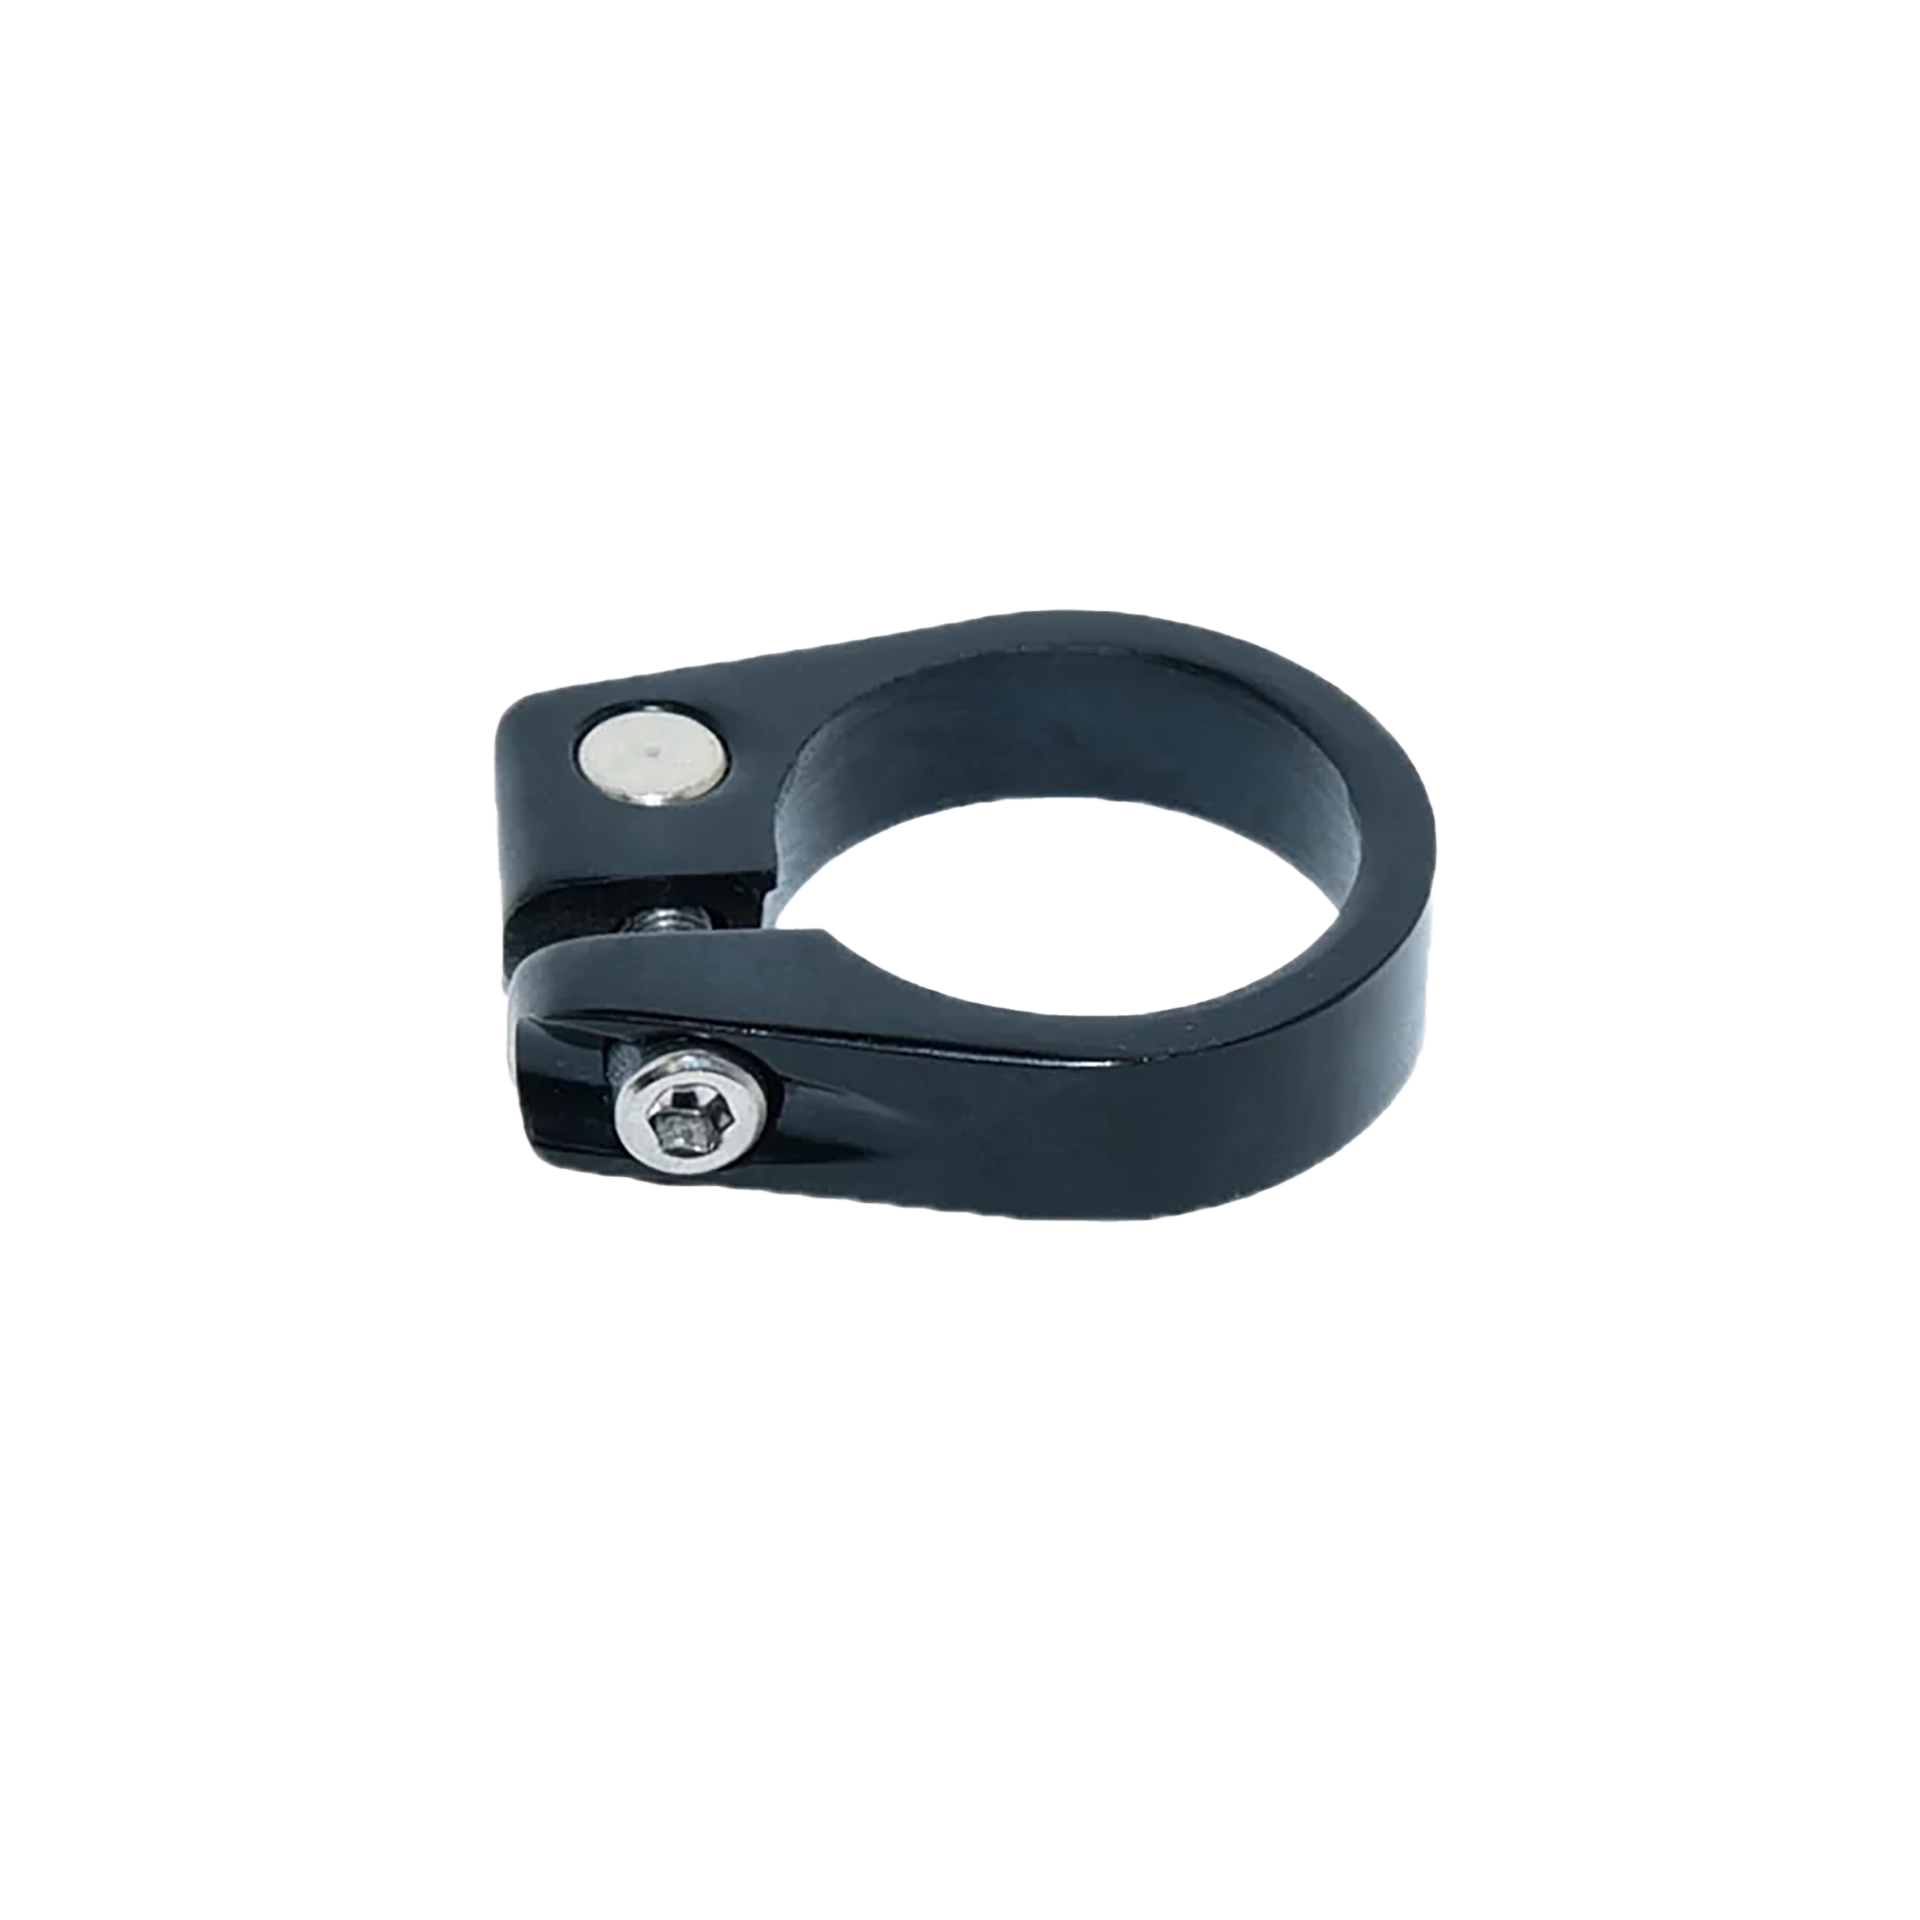 Seatclamp, 28.6, for seatpost size 25.4